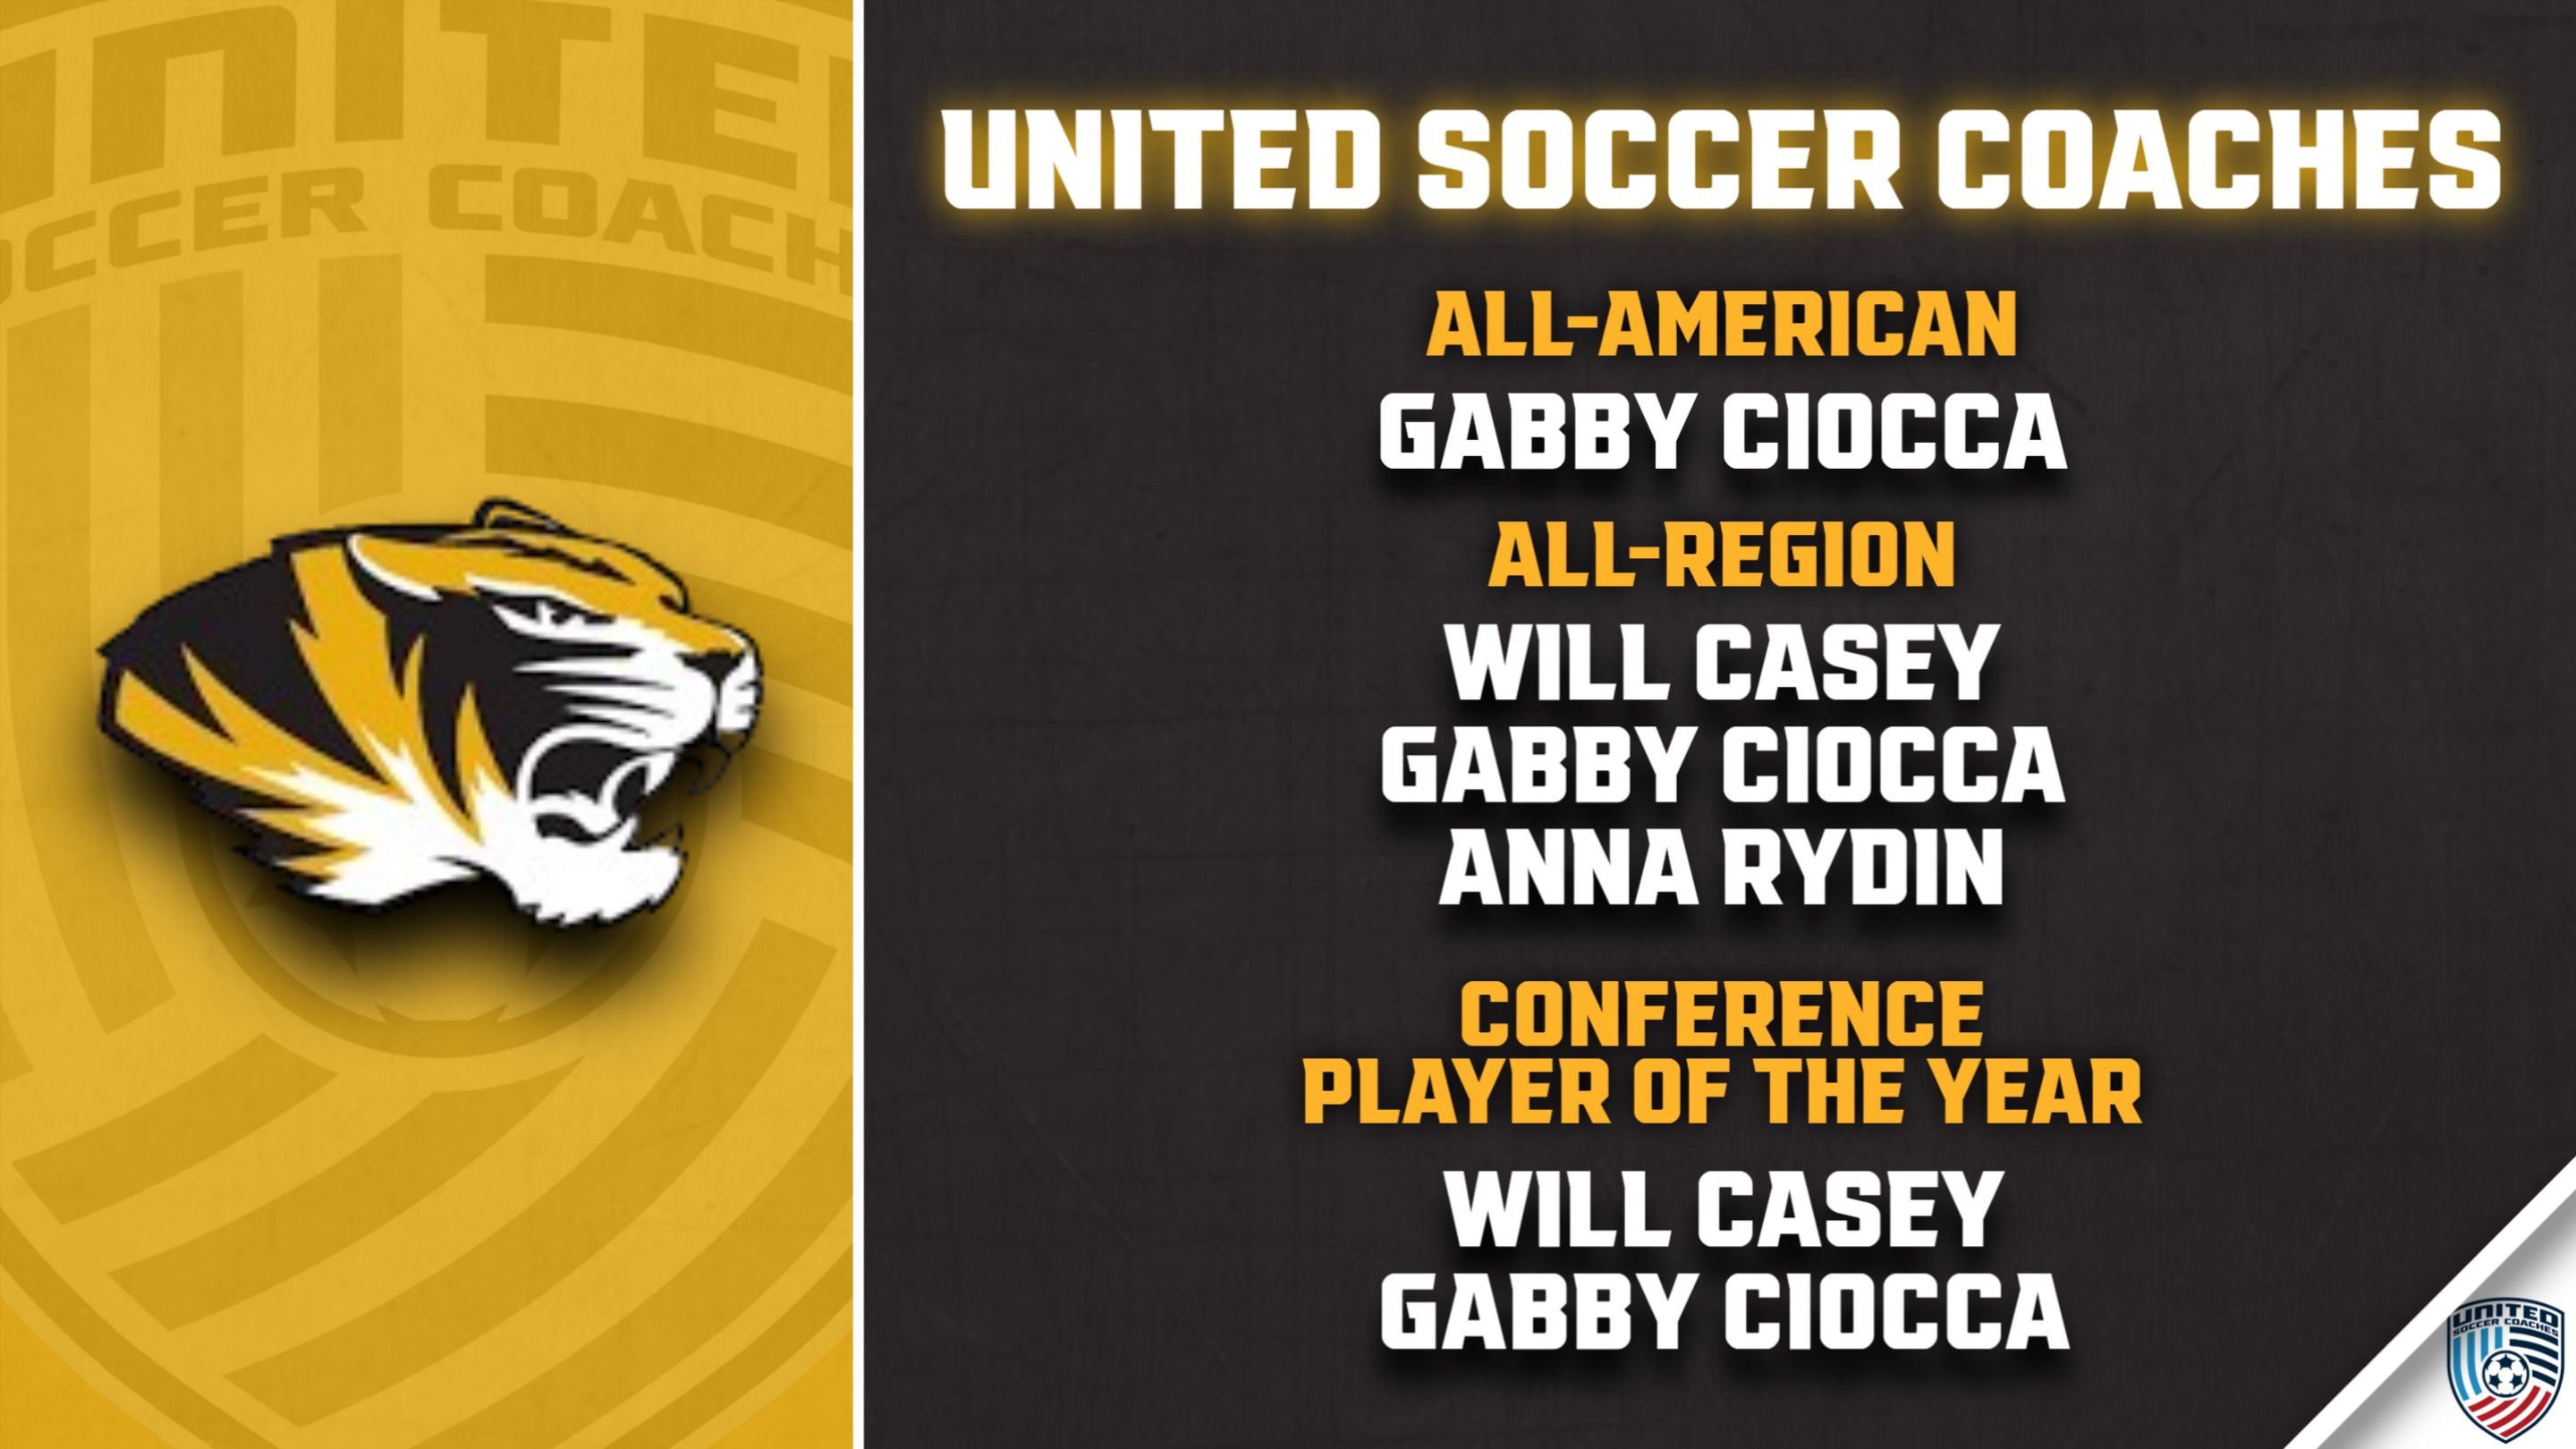 1720881414_USC1.jpeg - Image for Tigers Soccer Honored by United Soccer Coaches 